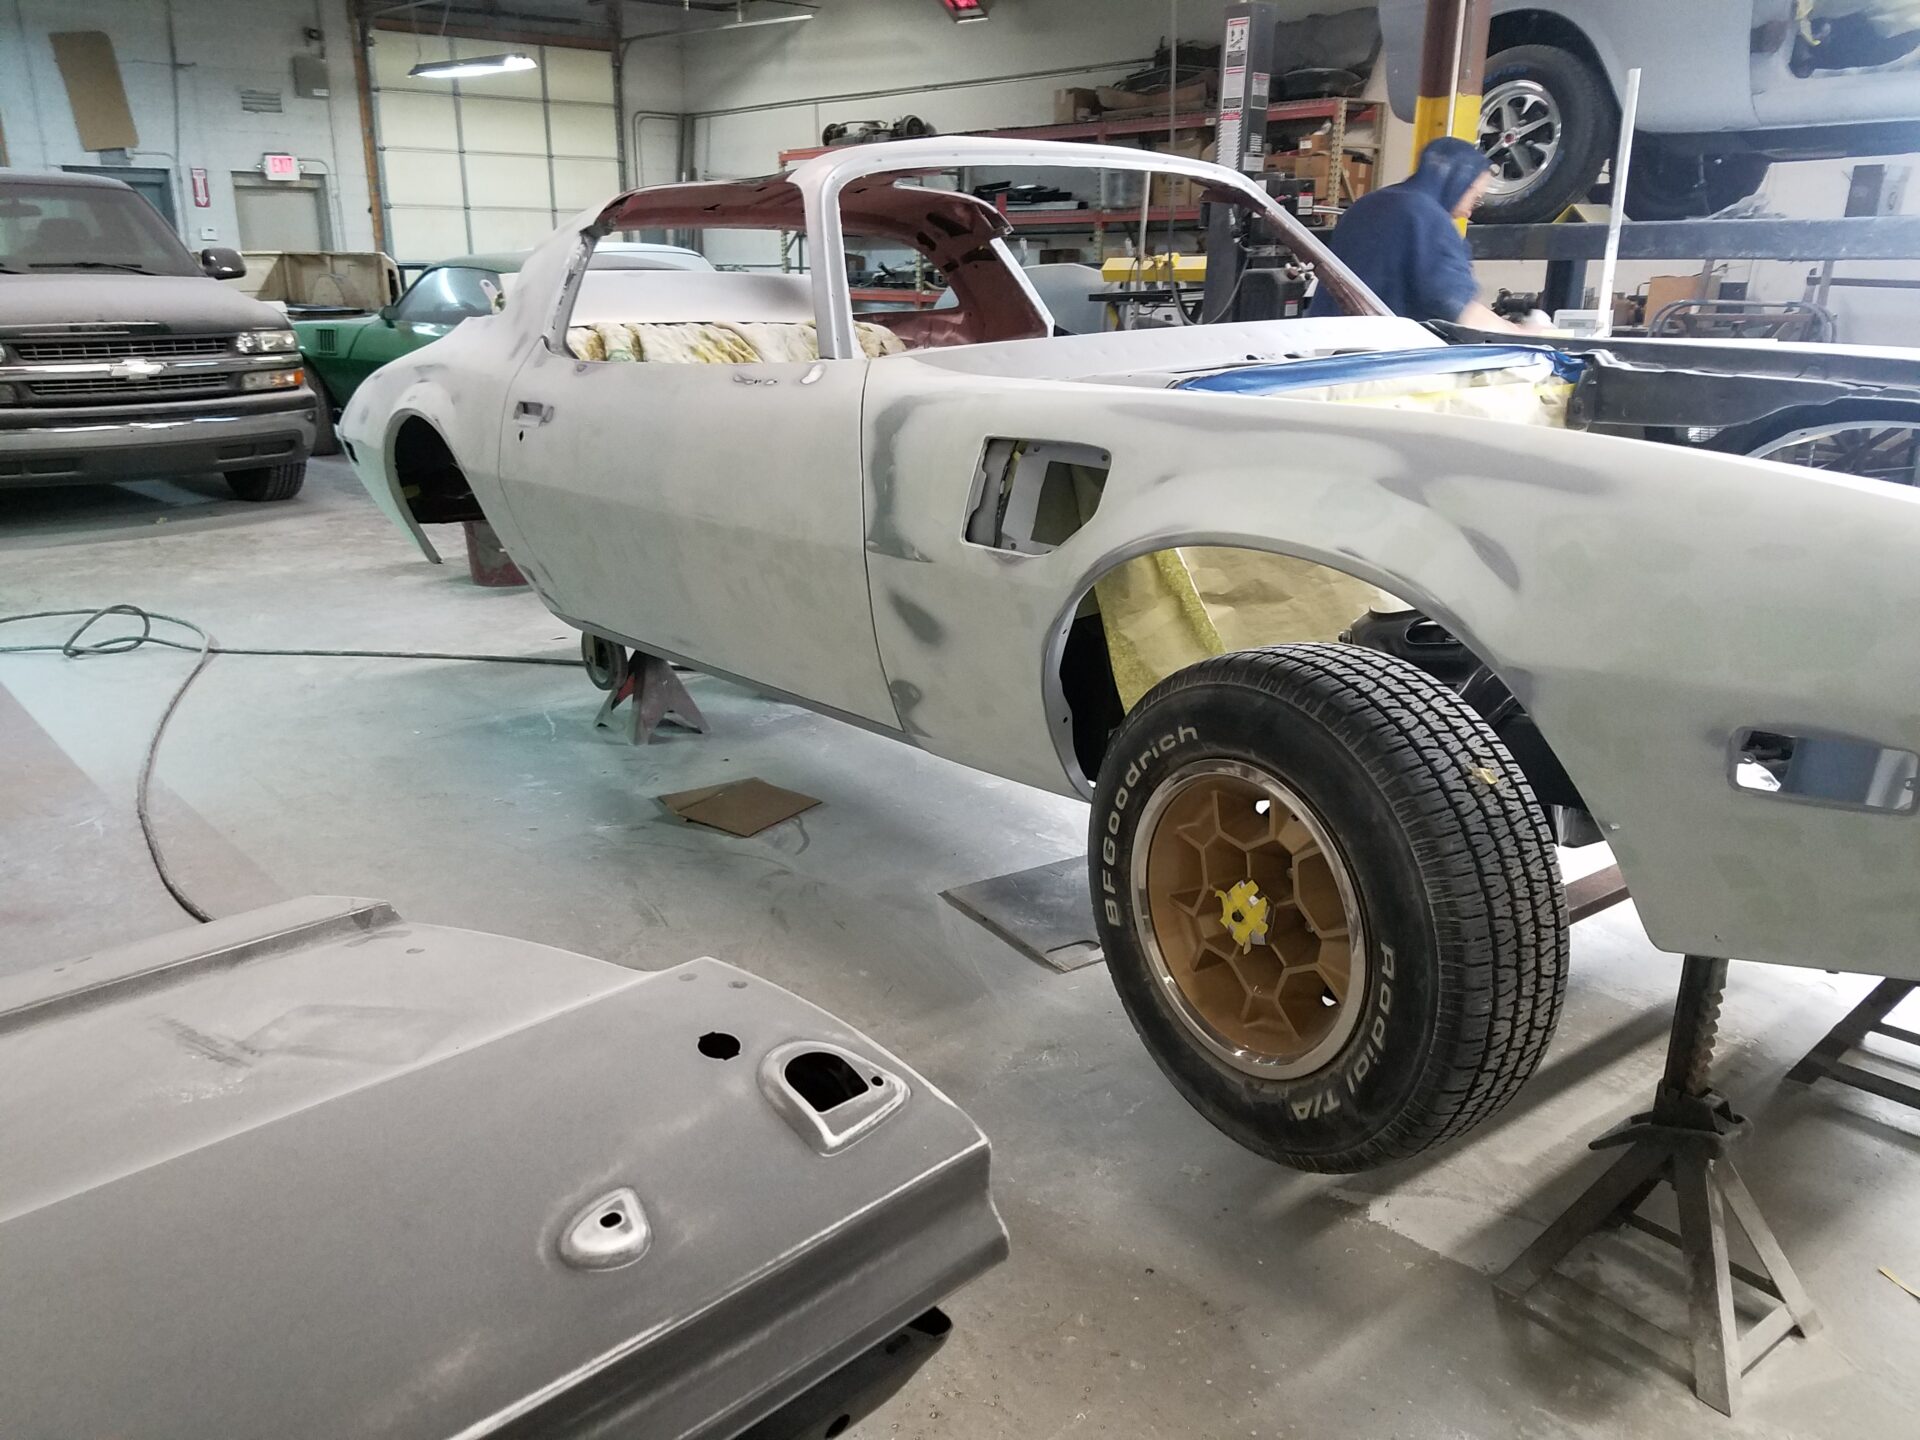 An ongloing restoration for the 1976 Pontiac Trans Am S/E